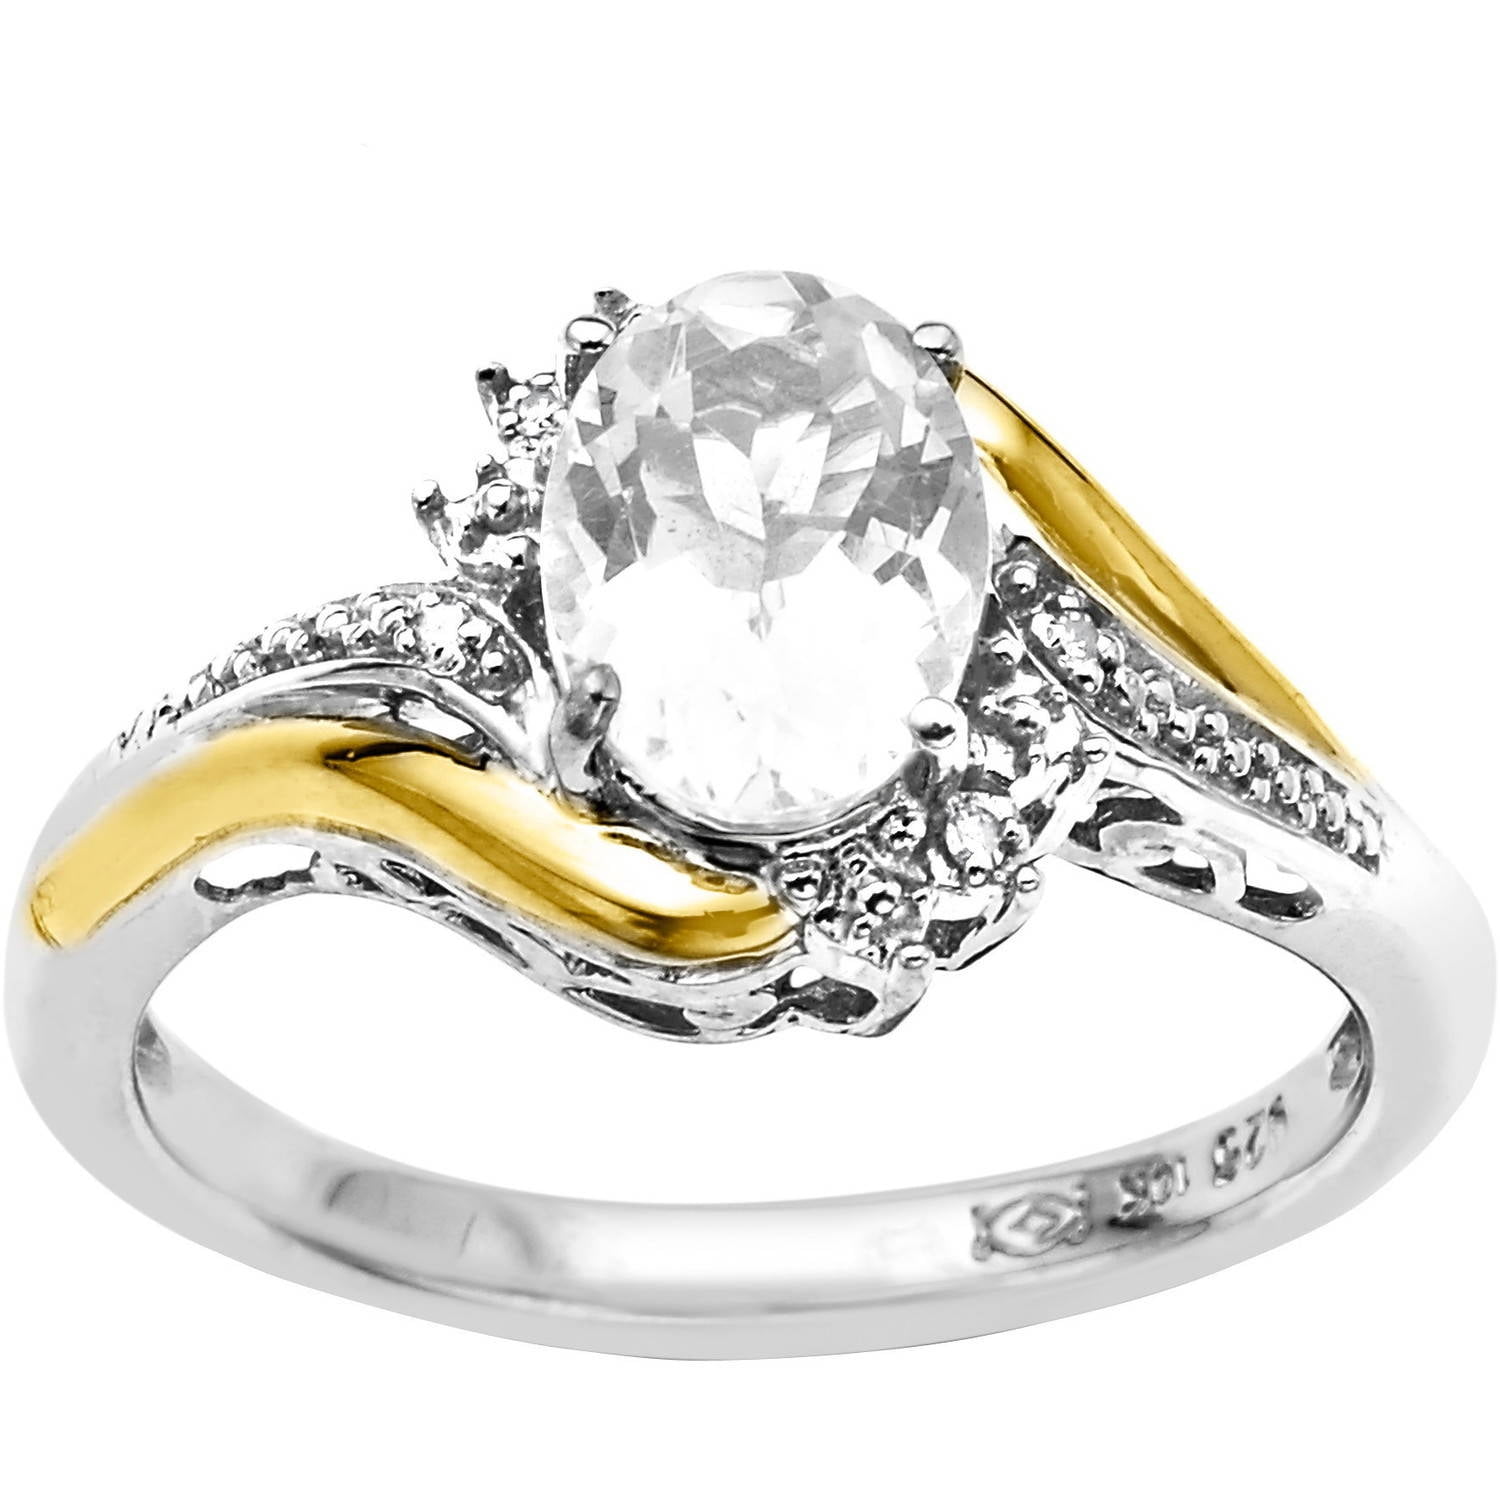 brilliance fine jewelry promise rings